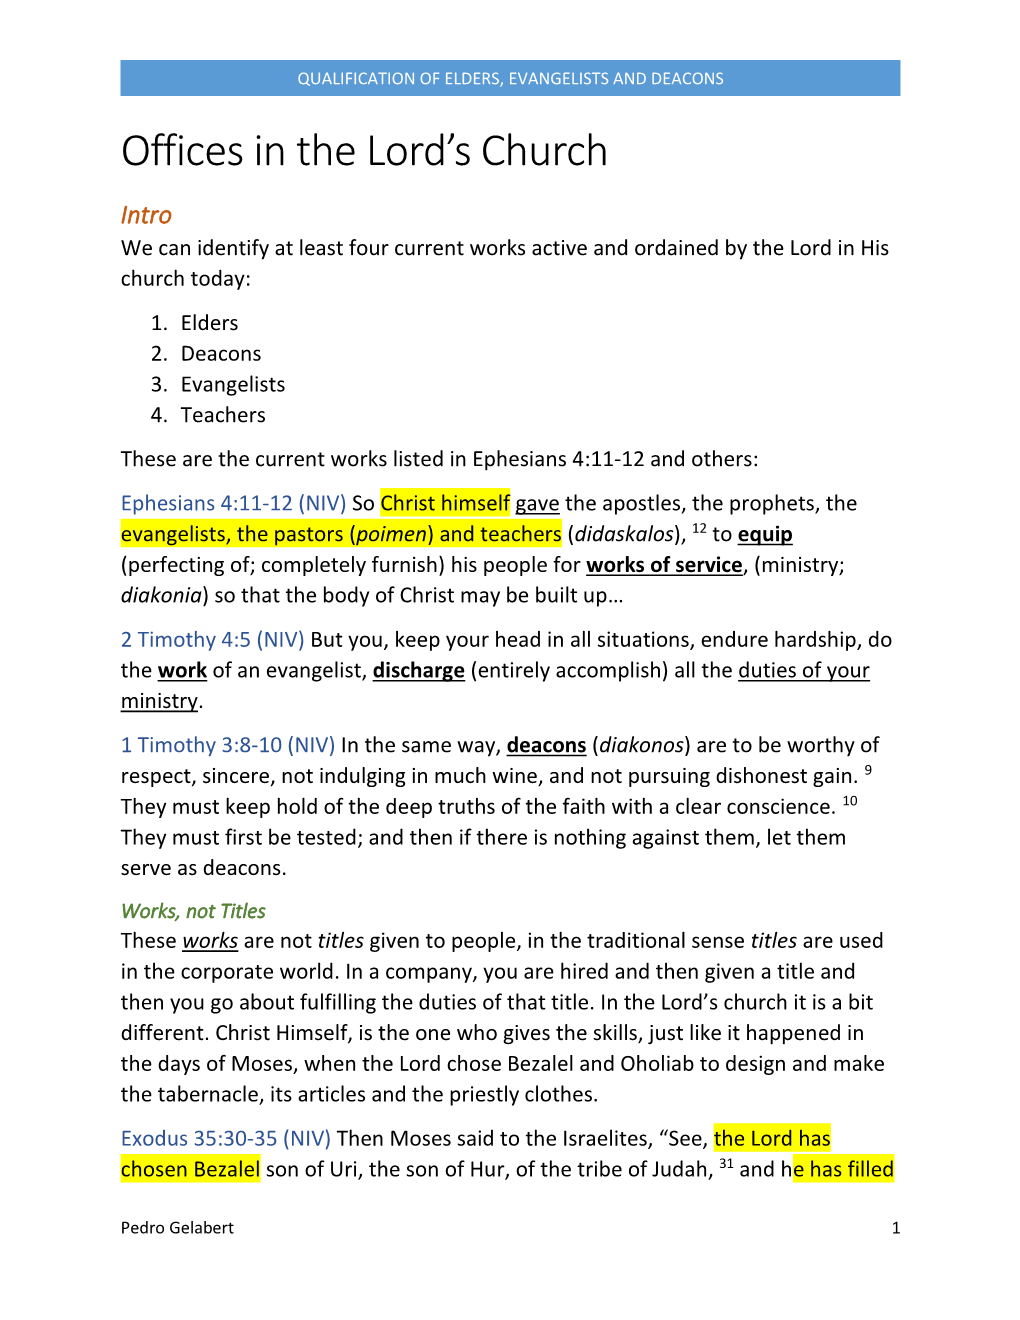 Offices in the Lord's Church Qualification of Elders, Evangelists